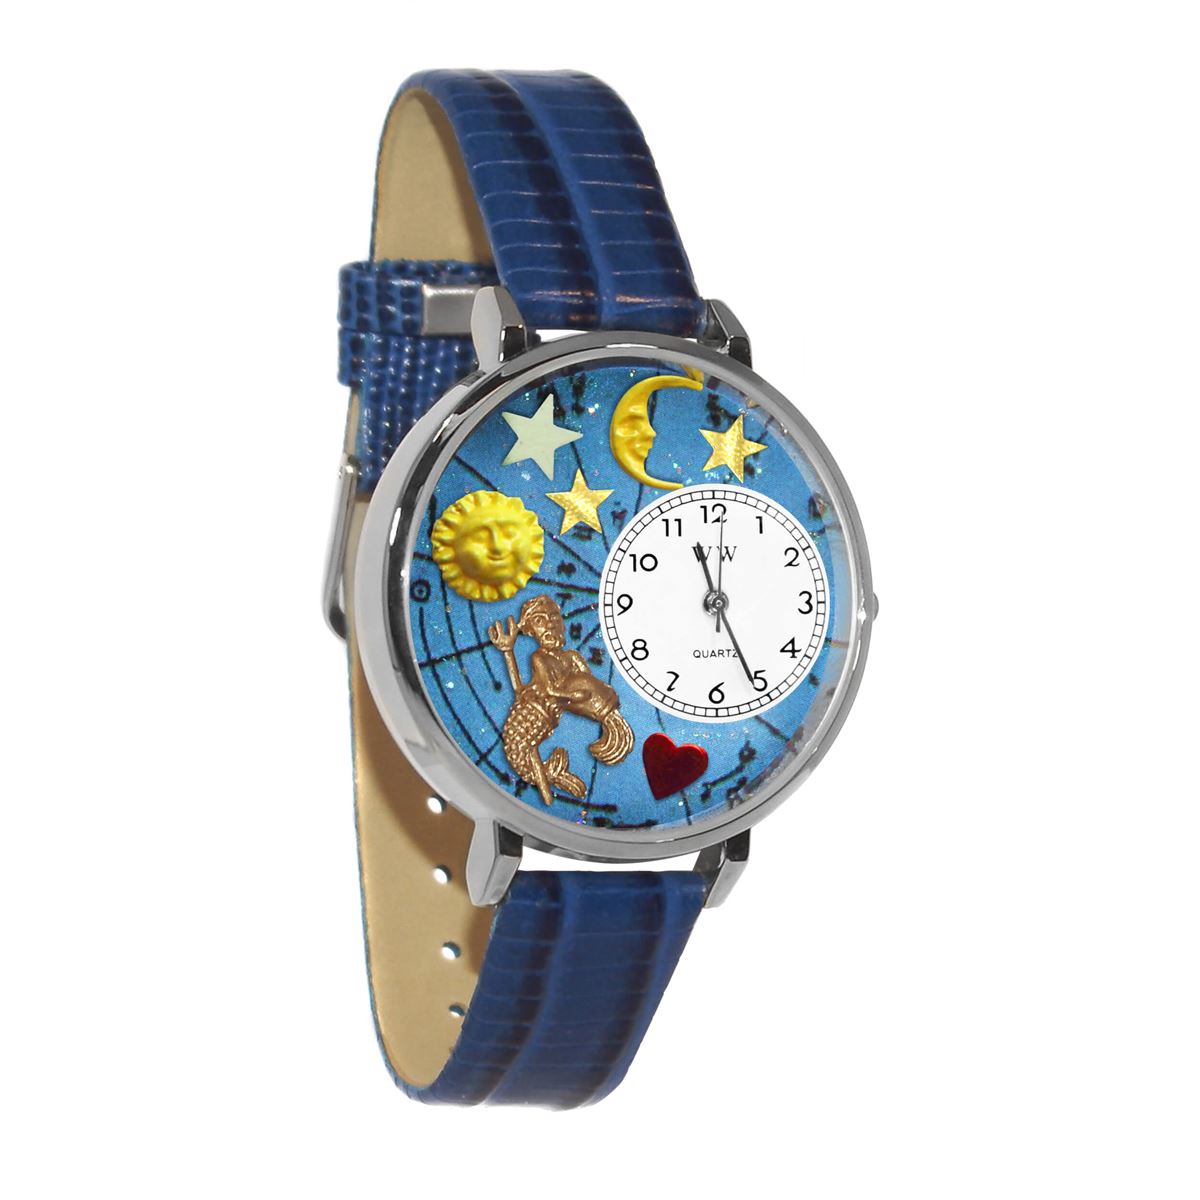 Whimsical Gifts | Aquarius Zodiac 3D Watch Large Style | Handmade in USA | Zodiac & Celestial |  | Novelty Unique Fun Miniatures Gift | Silver Finish Royal Blue Leather Watch Band